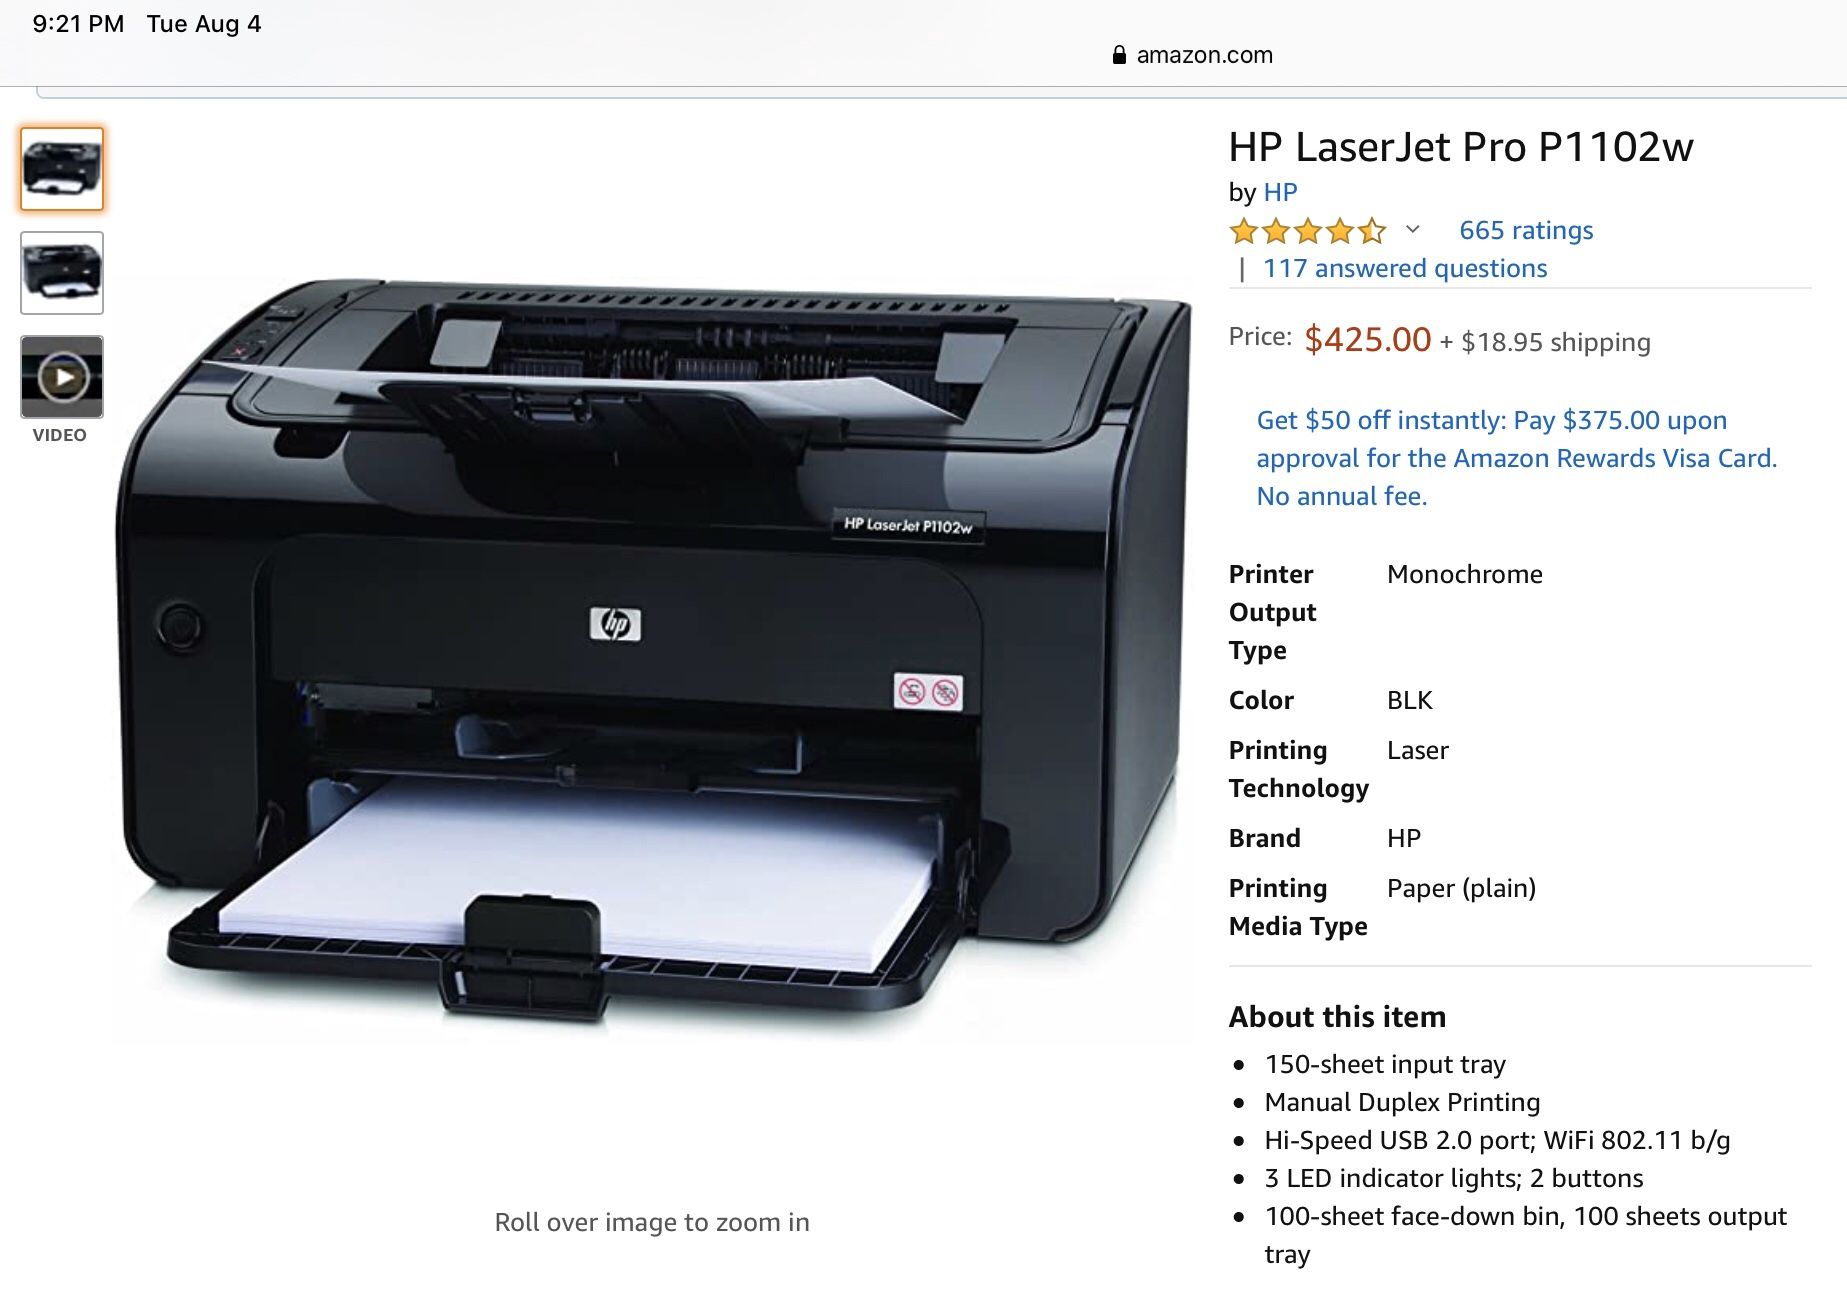 HP LaserJet Pro P1102w with two free toners